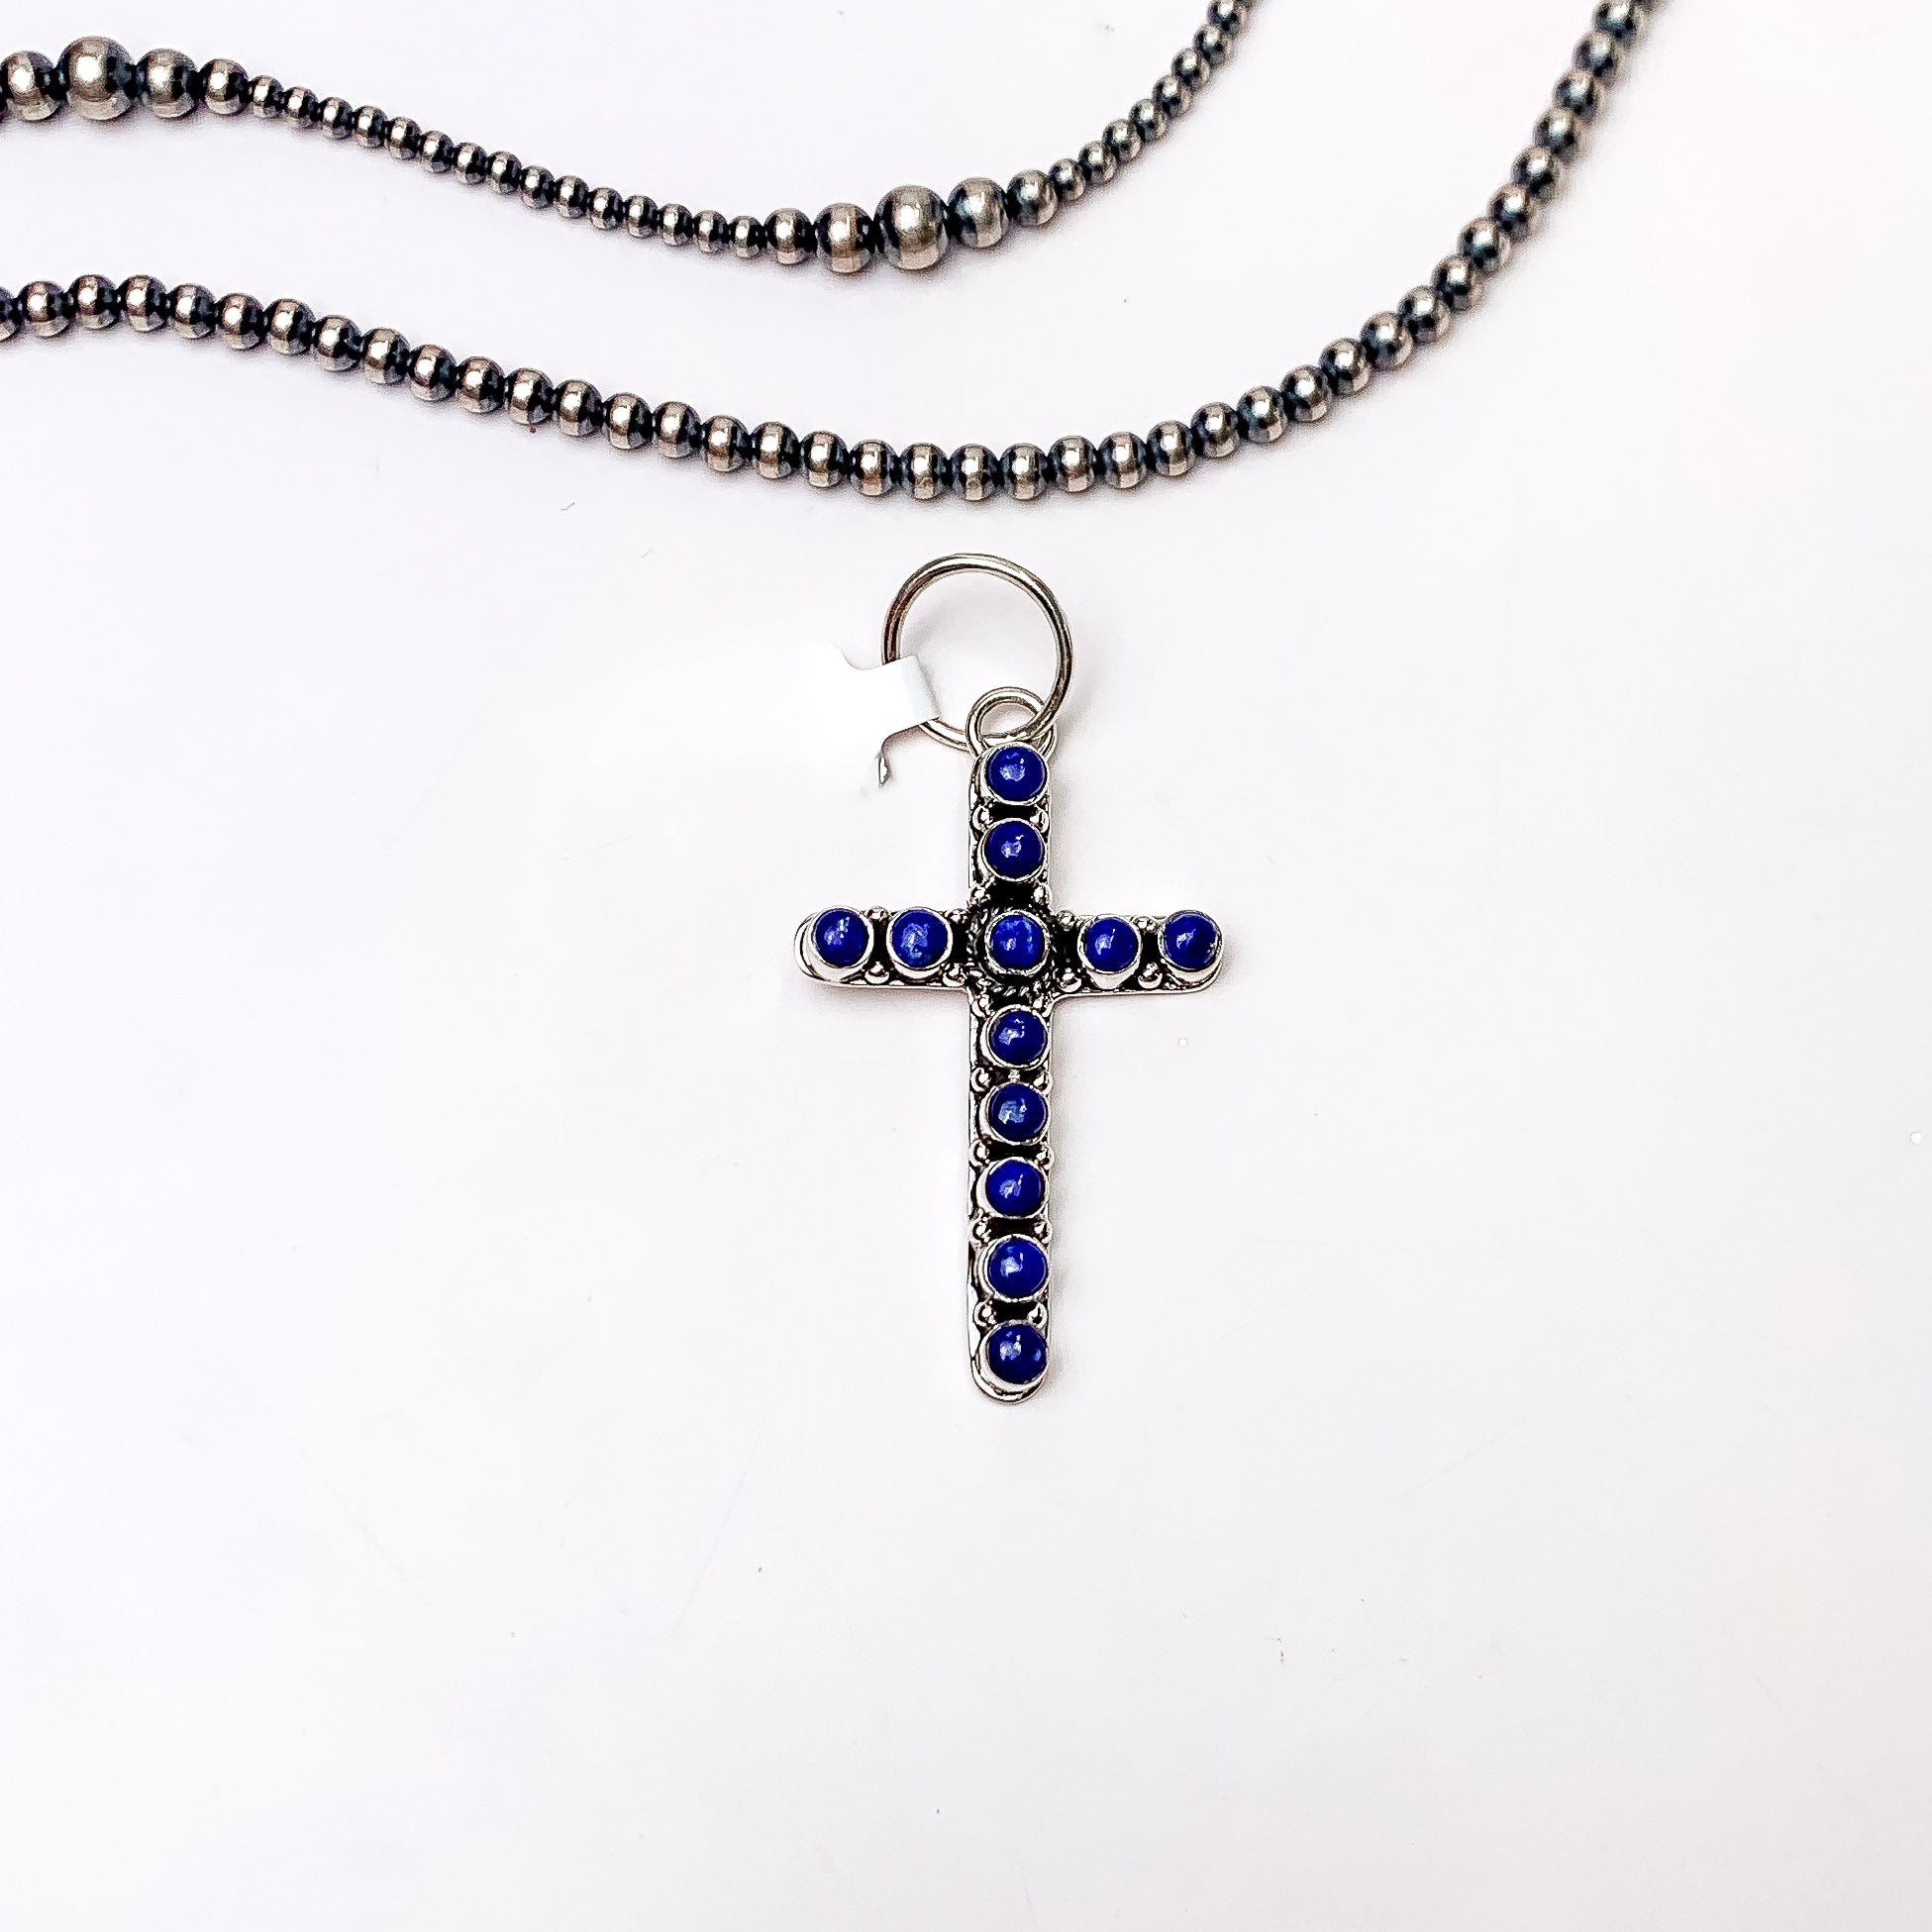 HaDa Collection | Sterling Silver Small Cross Pendant in Dark Lapis Stones - Giddy Up Glamour Boutique